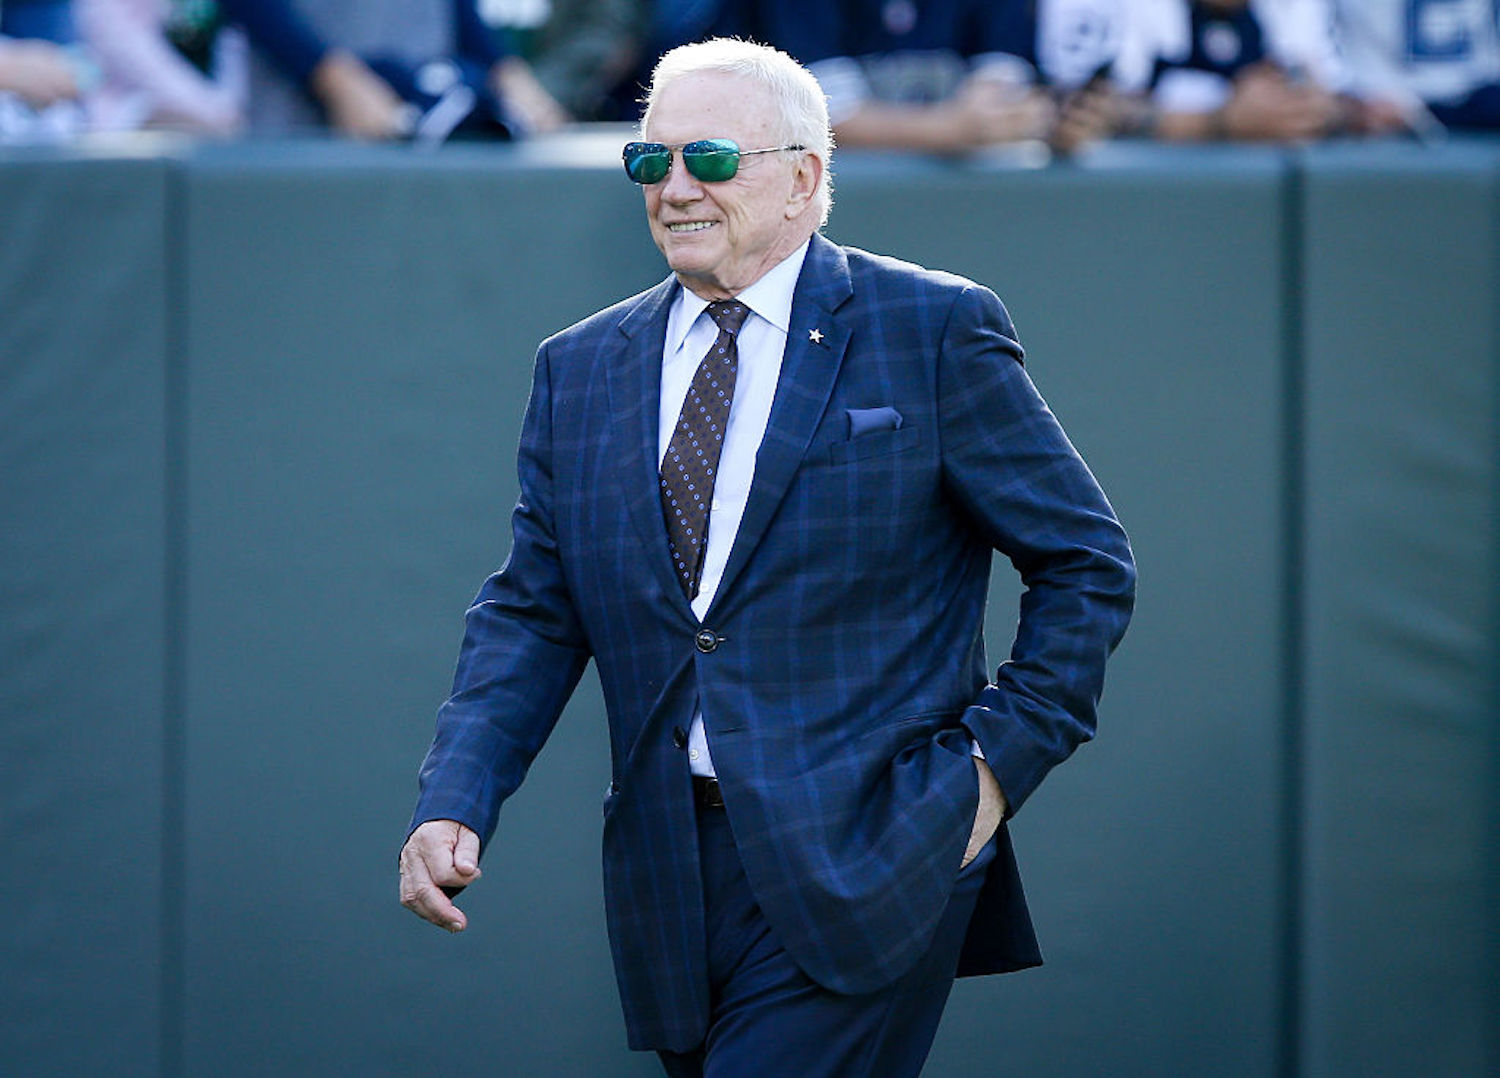 Three Dallas Cowboys have opted out of the 2020 NFL season, but Jerry Jones won't be complaining with $1.4 million more in cap space.